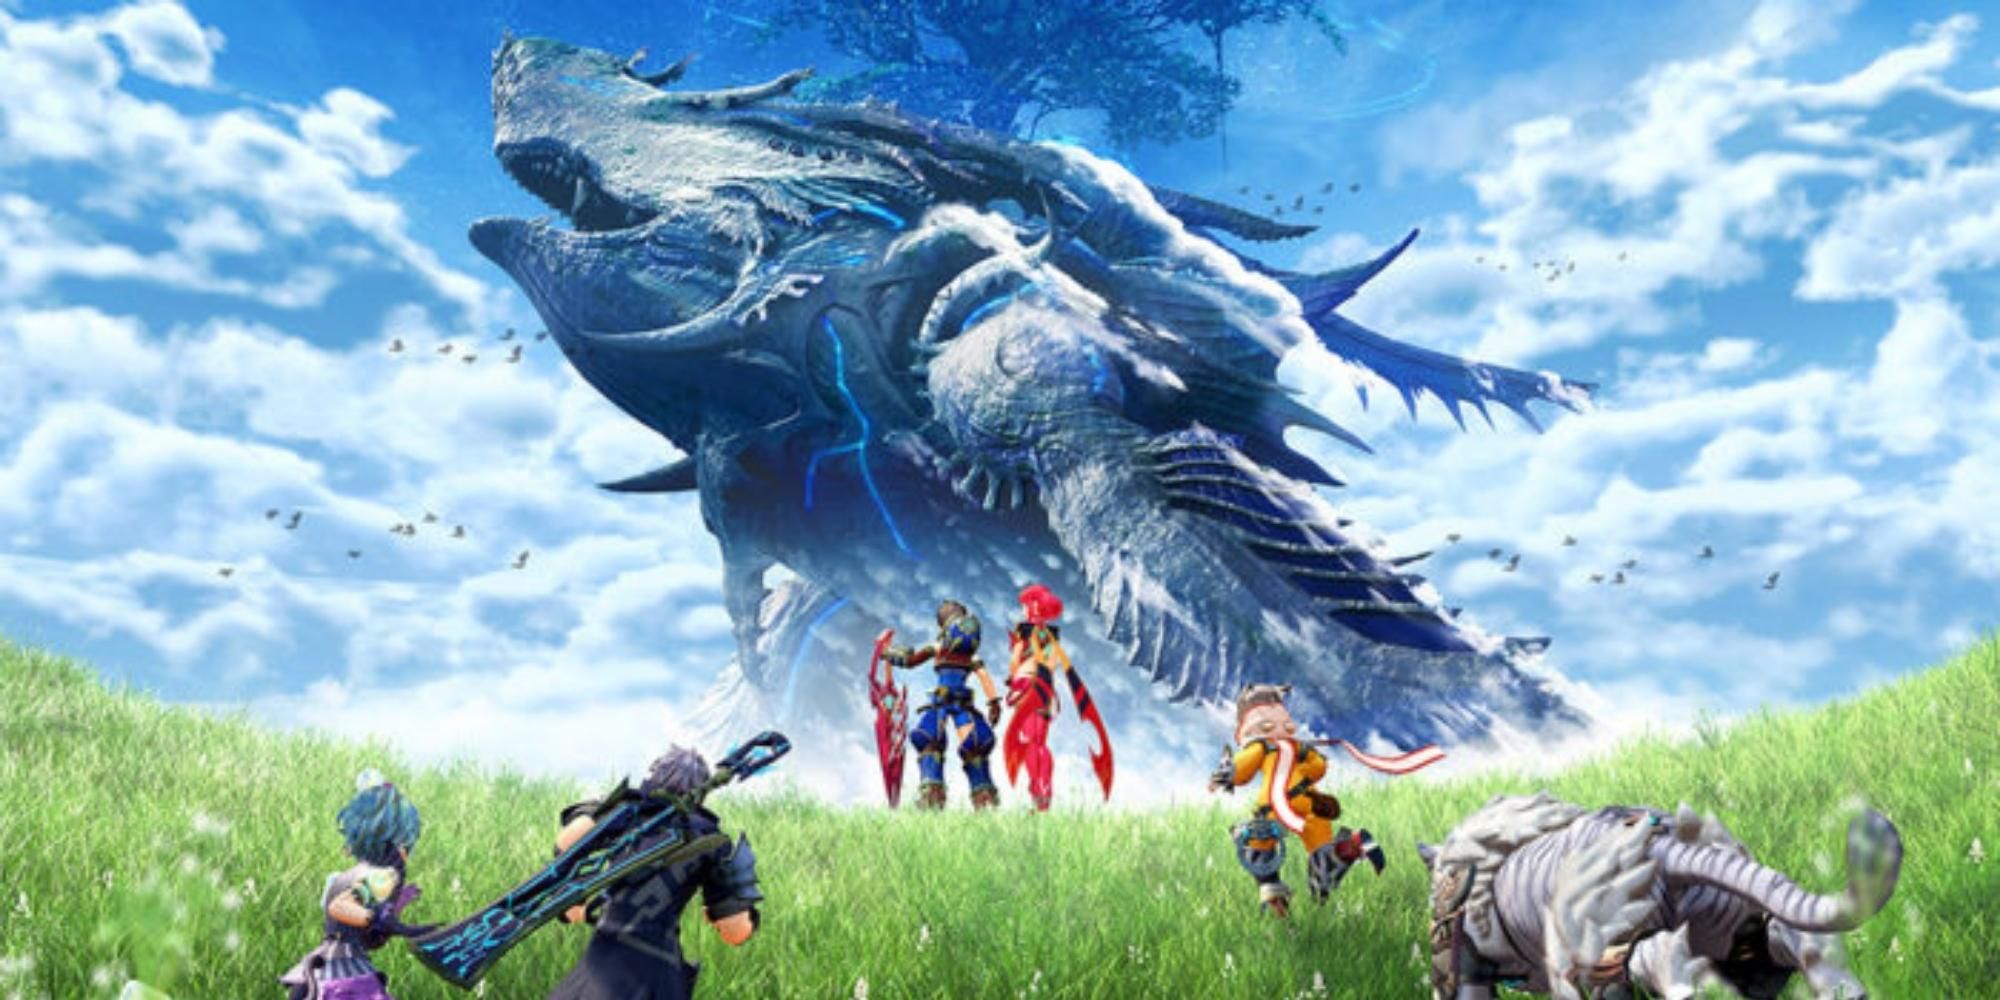 The battle in Xenoblade Chronicles 2